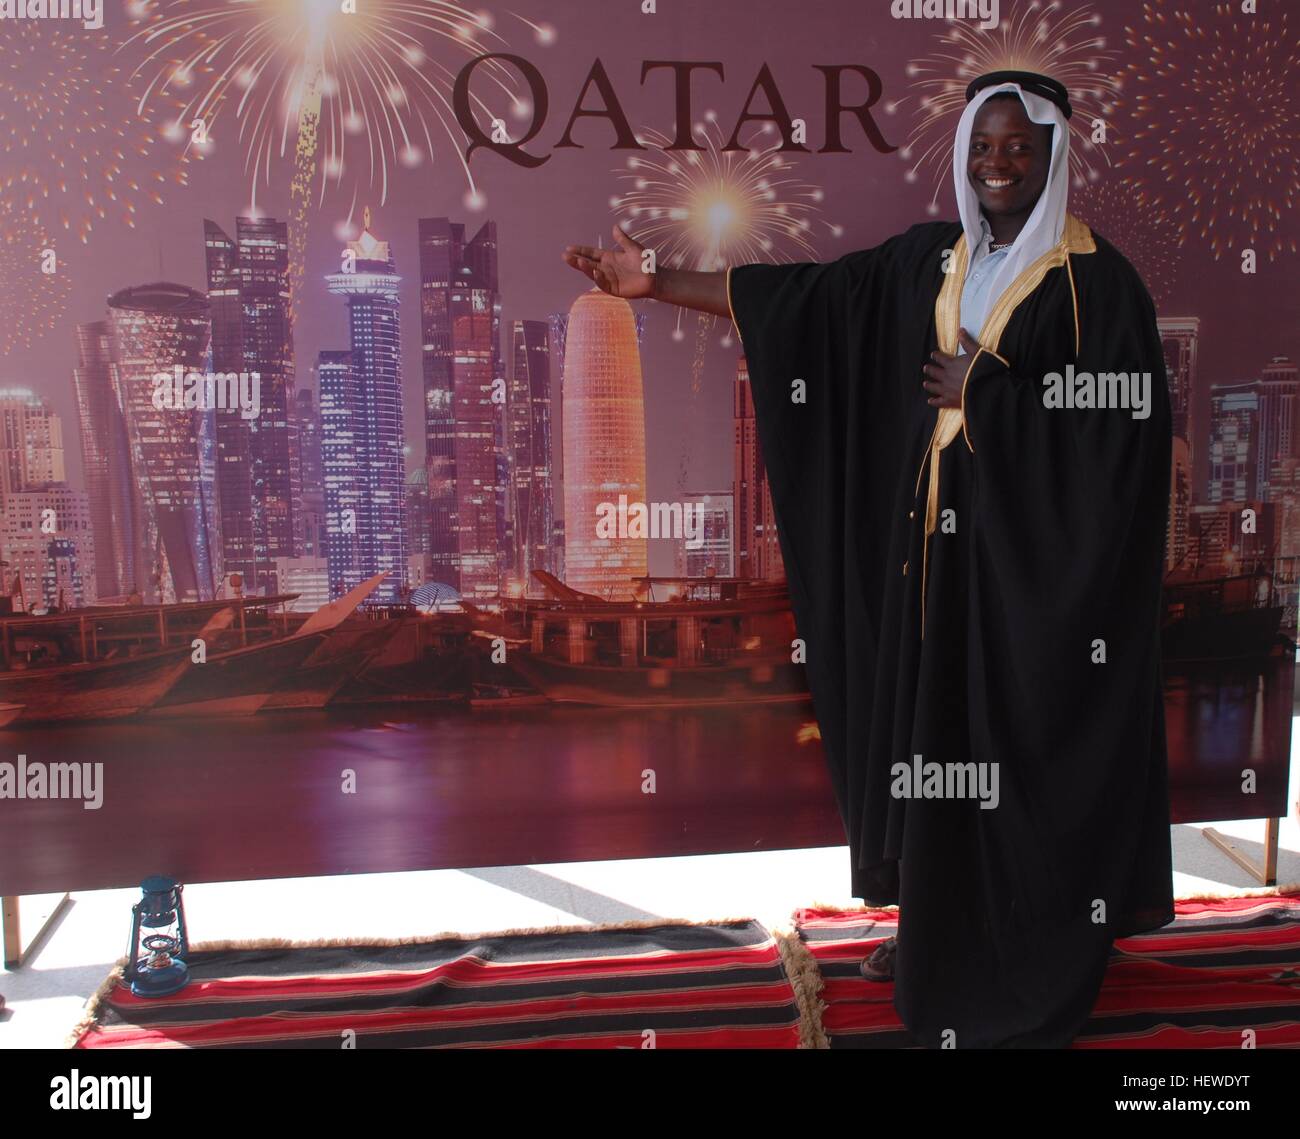 A man who wear to Arabic clothes at the Qatar Pavilion of EXPO 2016 Antalya Stock Photo